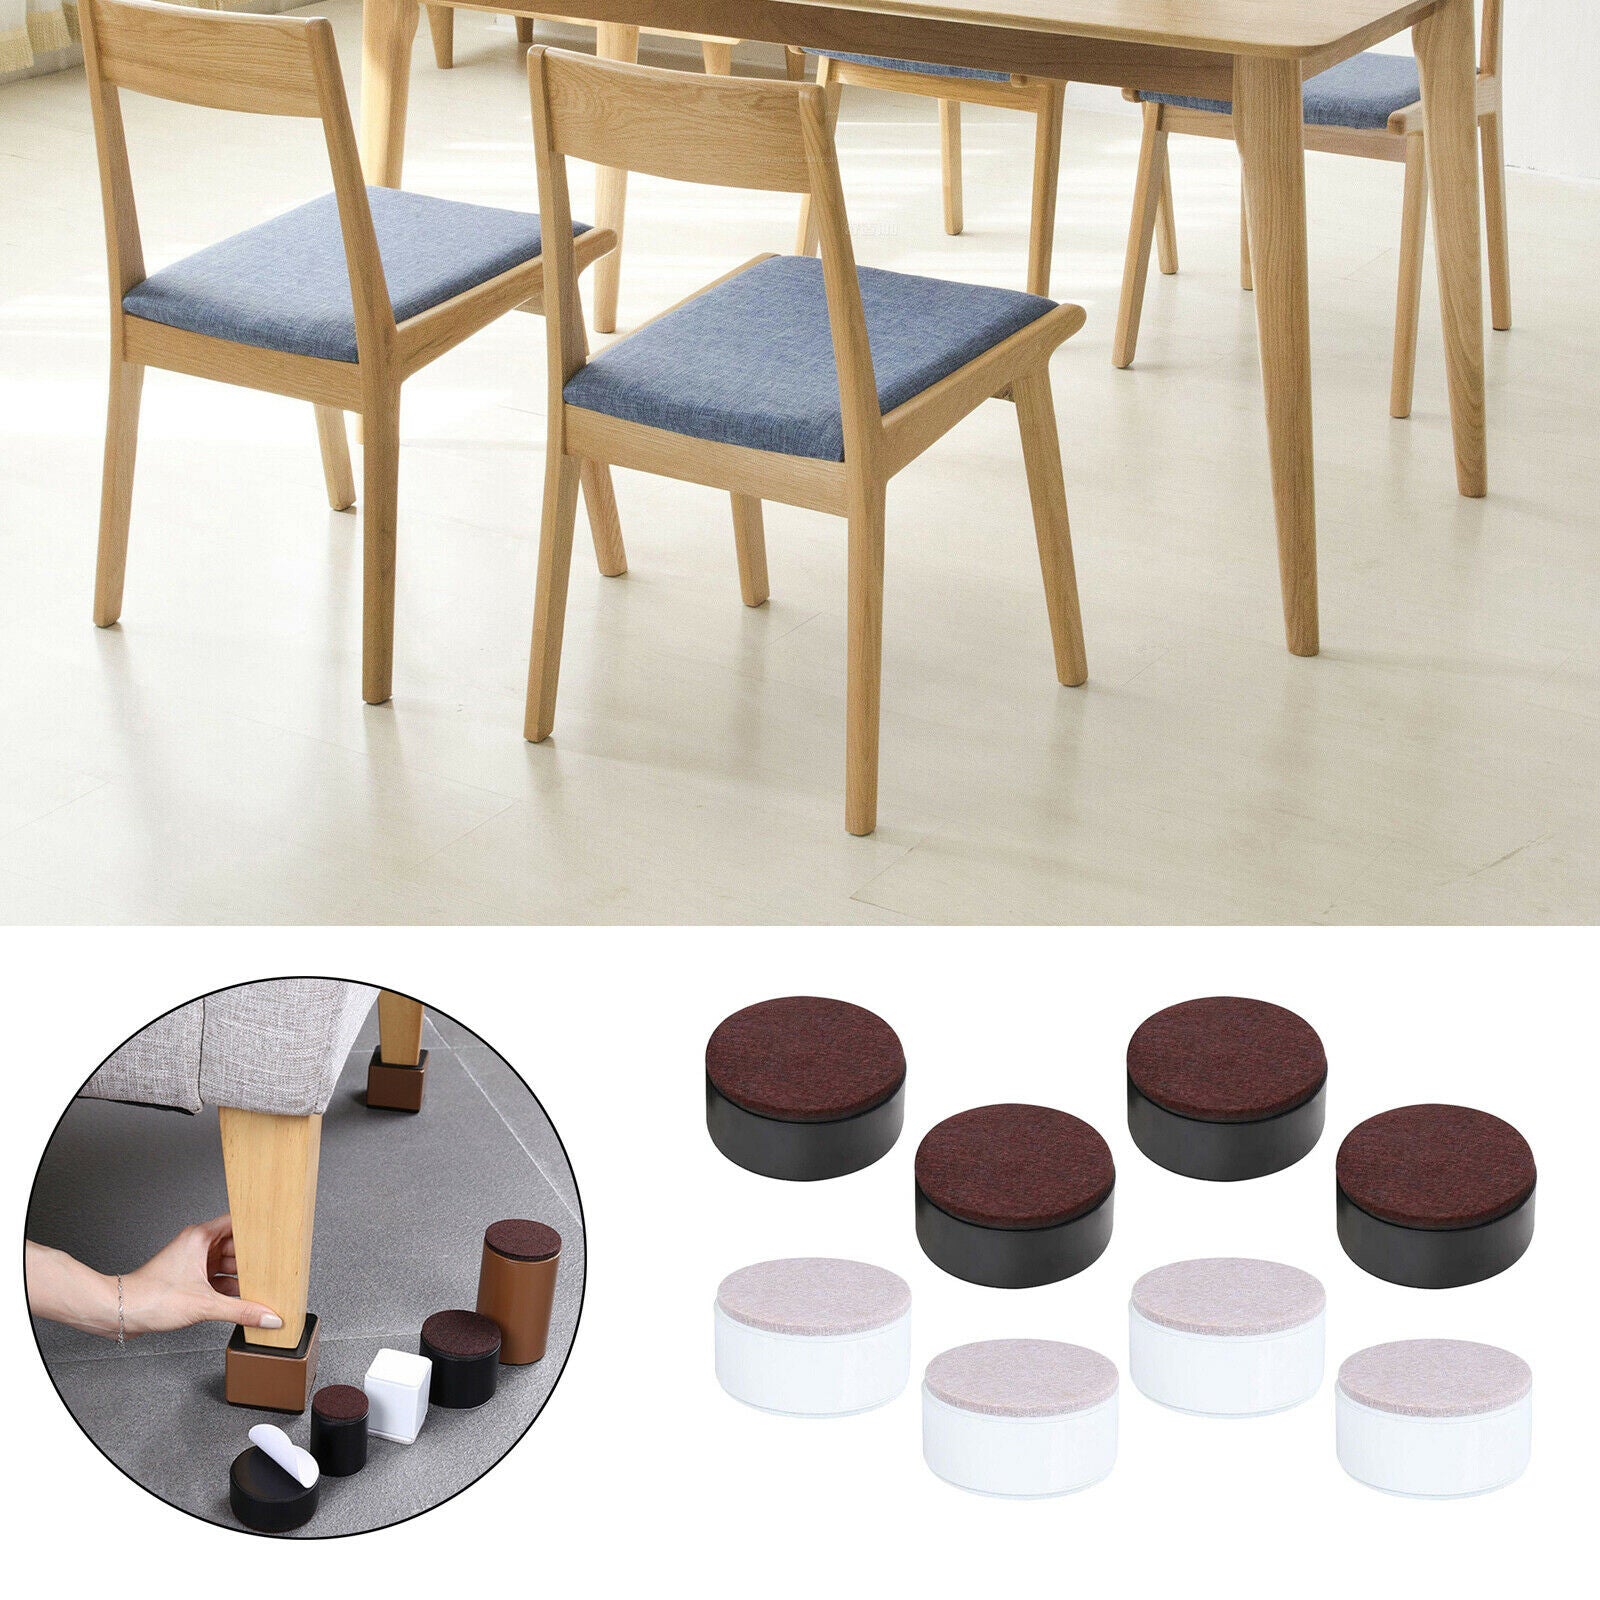 8 Pieces Round Square Bed Risers Furniture Lifts Anti Slip for Home Office